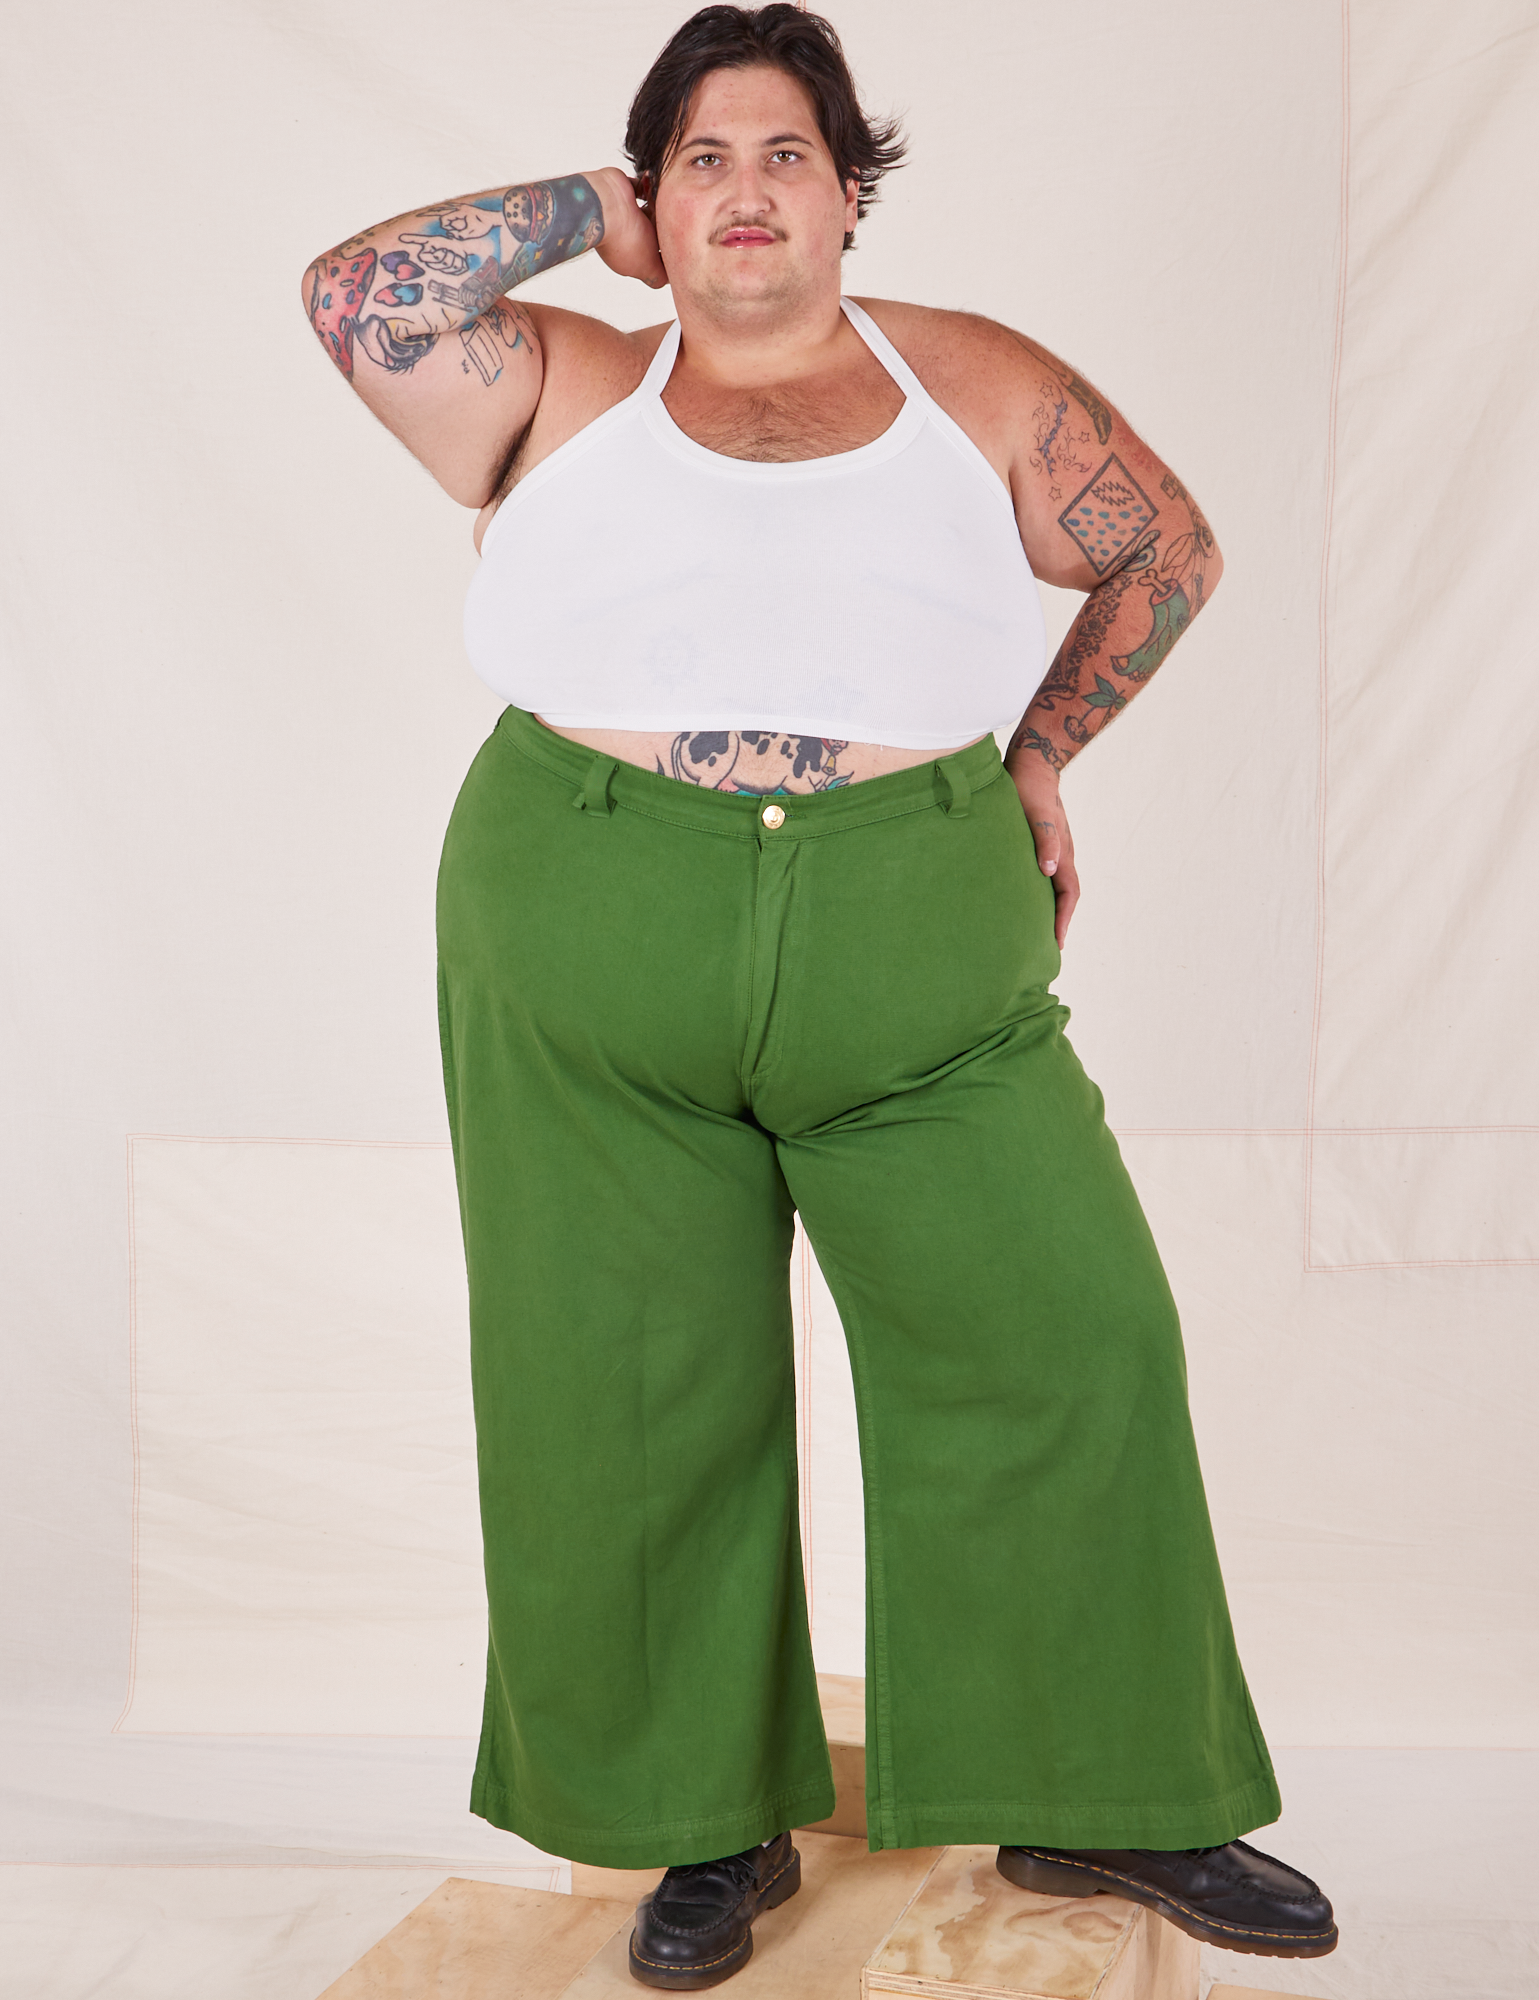 Sam is 5&#39;10&quot; and wearing 3XL Bell Bottoms in Lawn Green paired with vintage off-white Halter Top